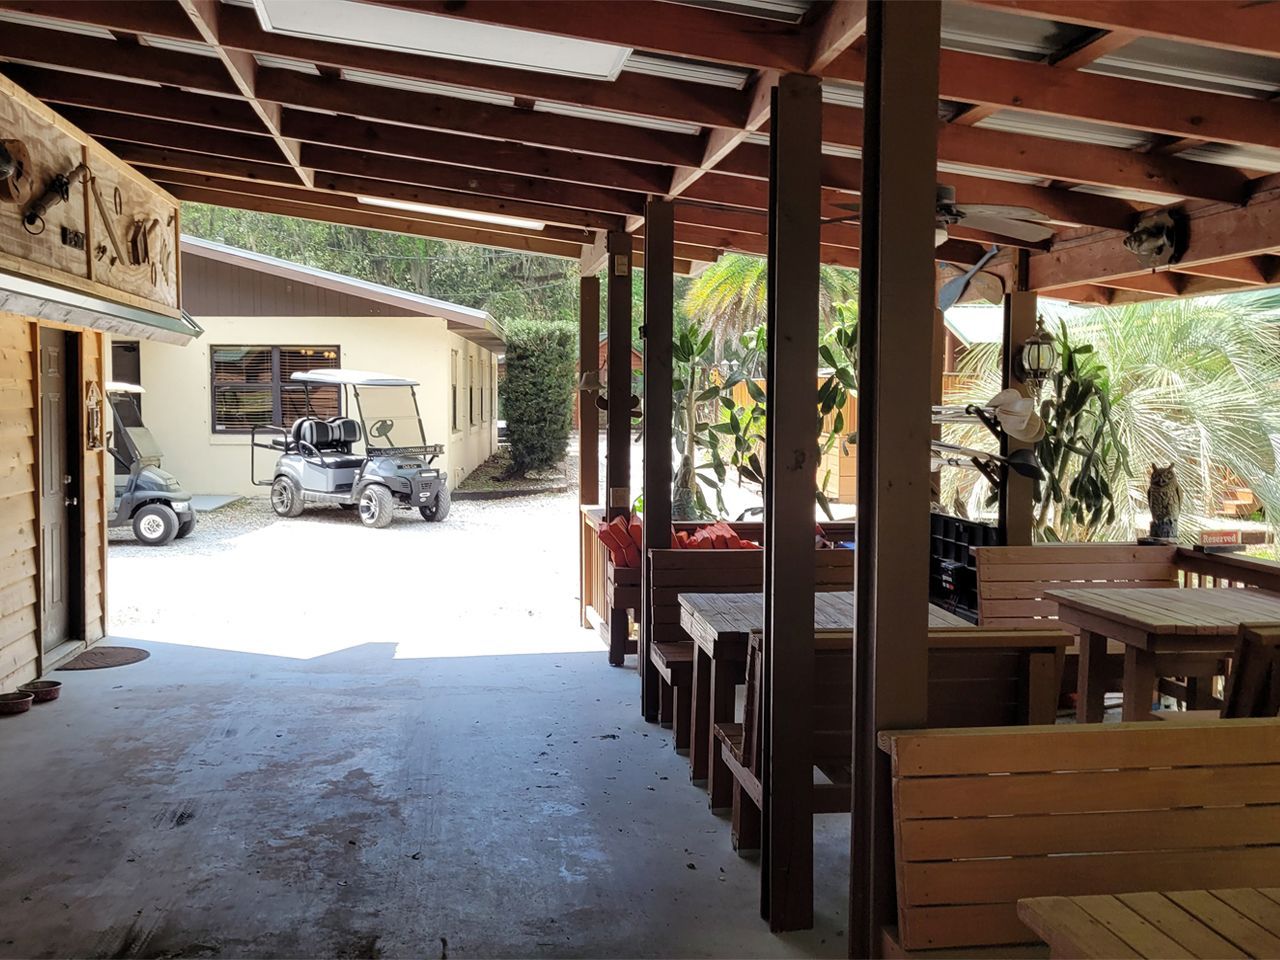 a covered area with tables and chairs and a golf cart parked in the background